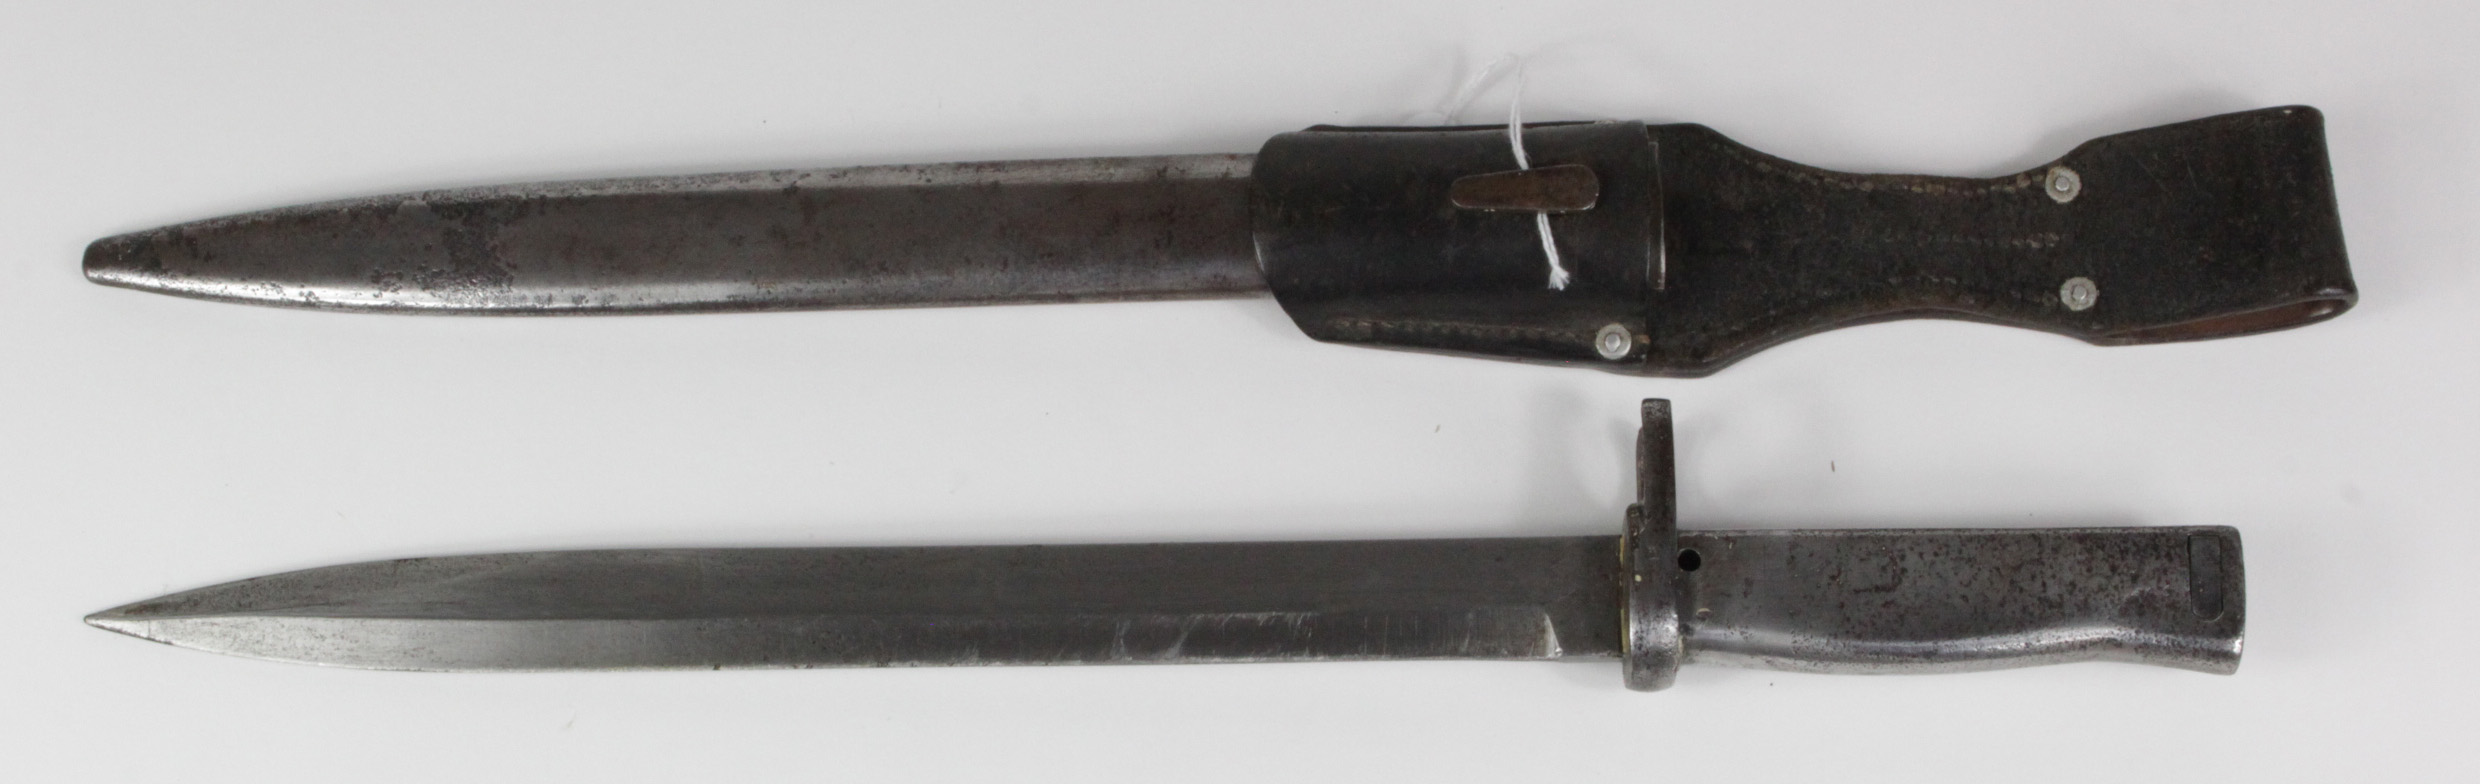 German WW1 ersatz bayonet with metal scabbard and leather frog, maker marked